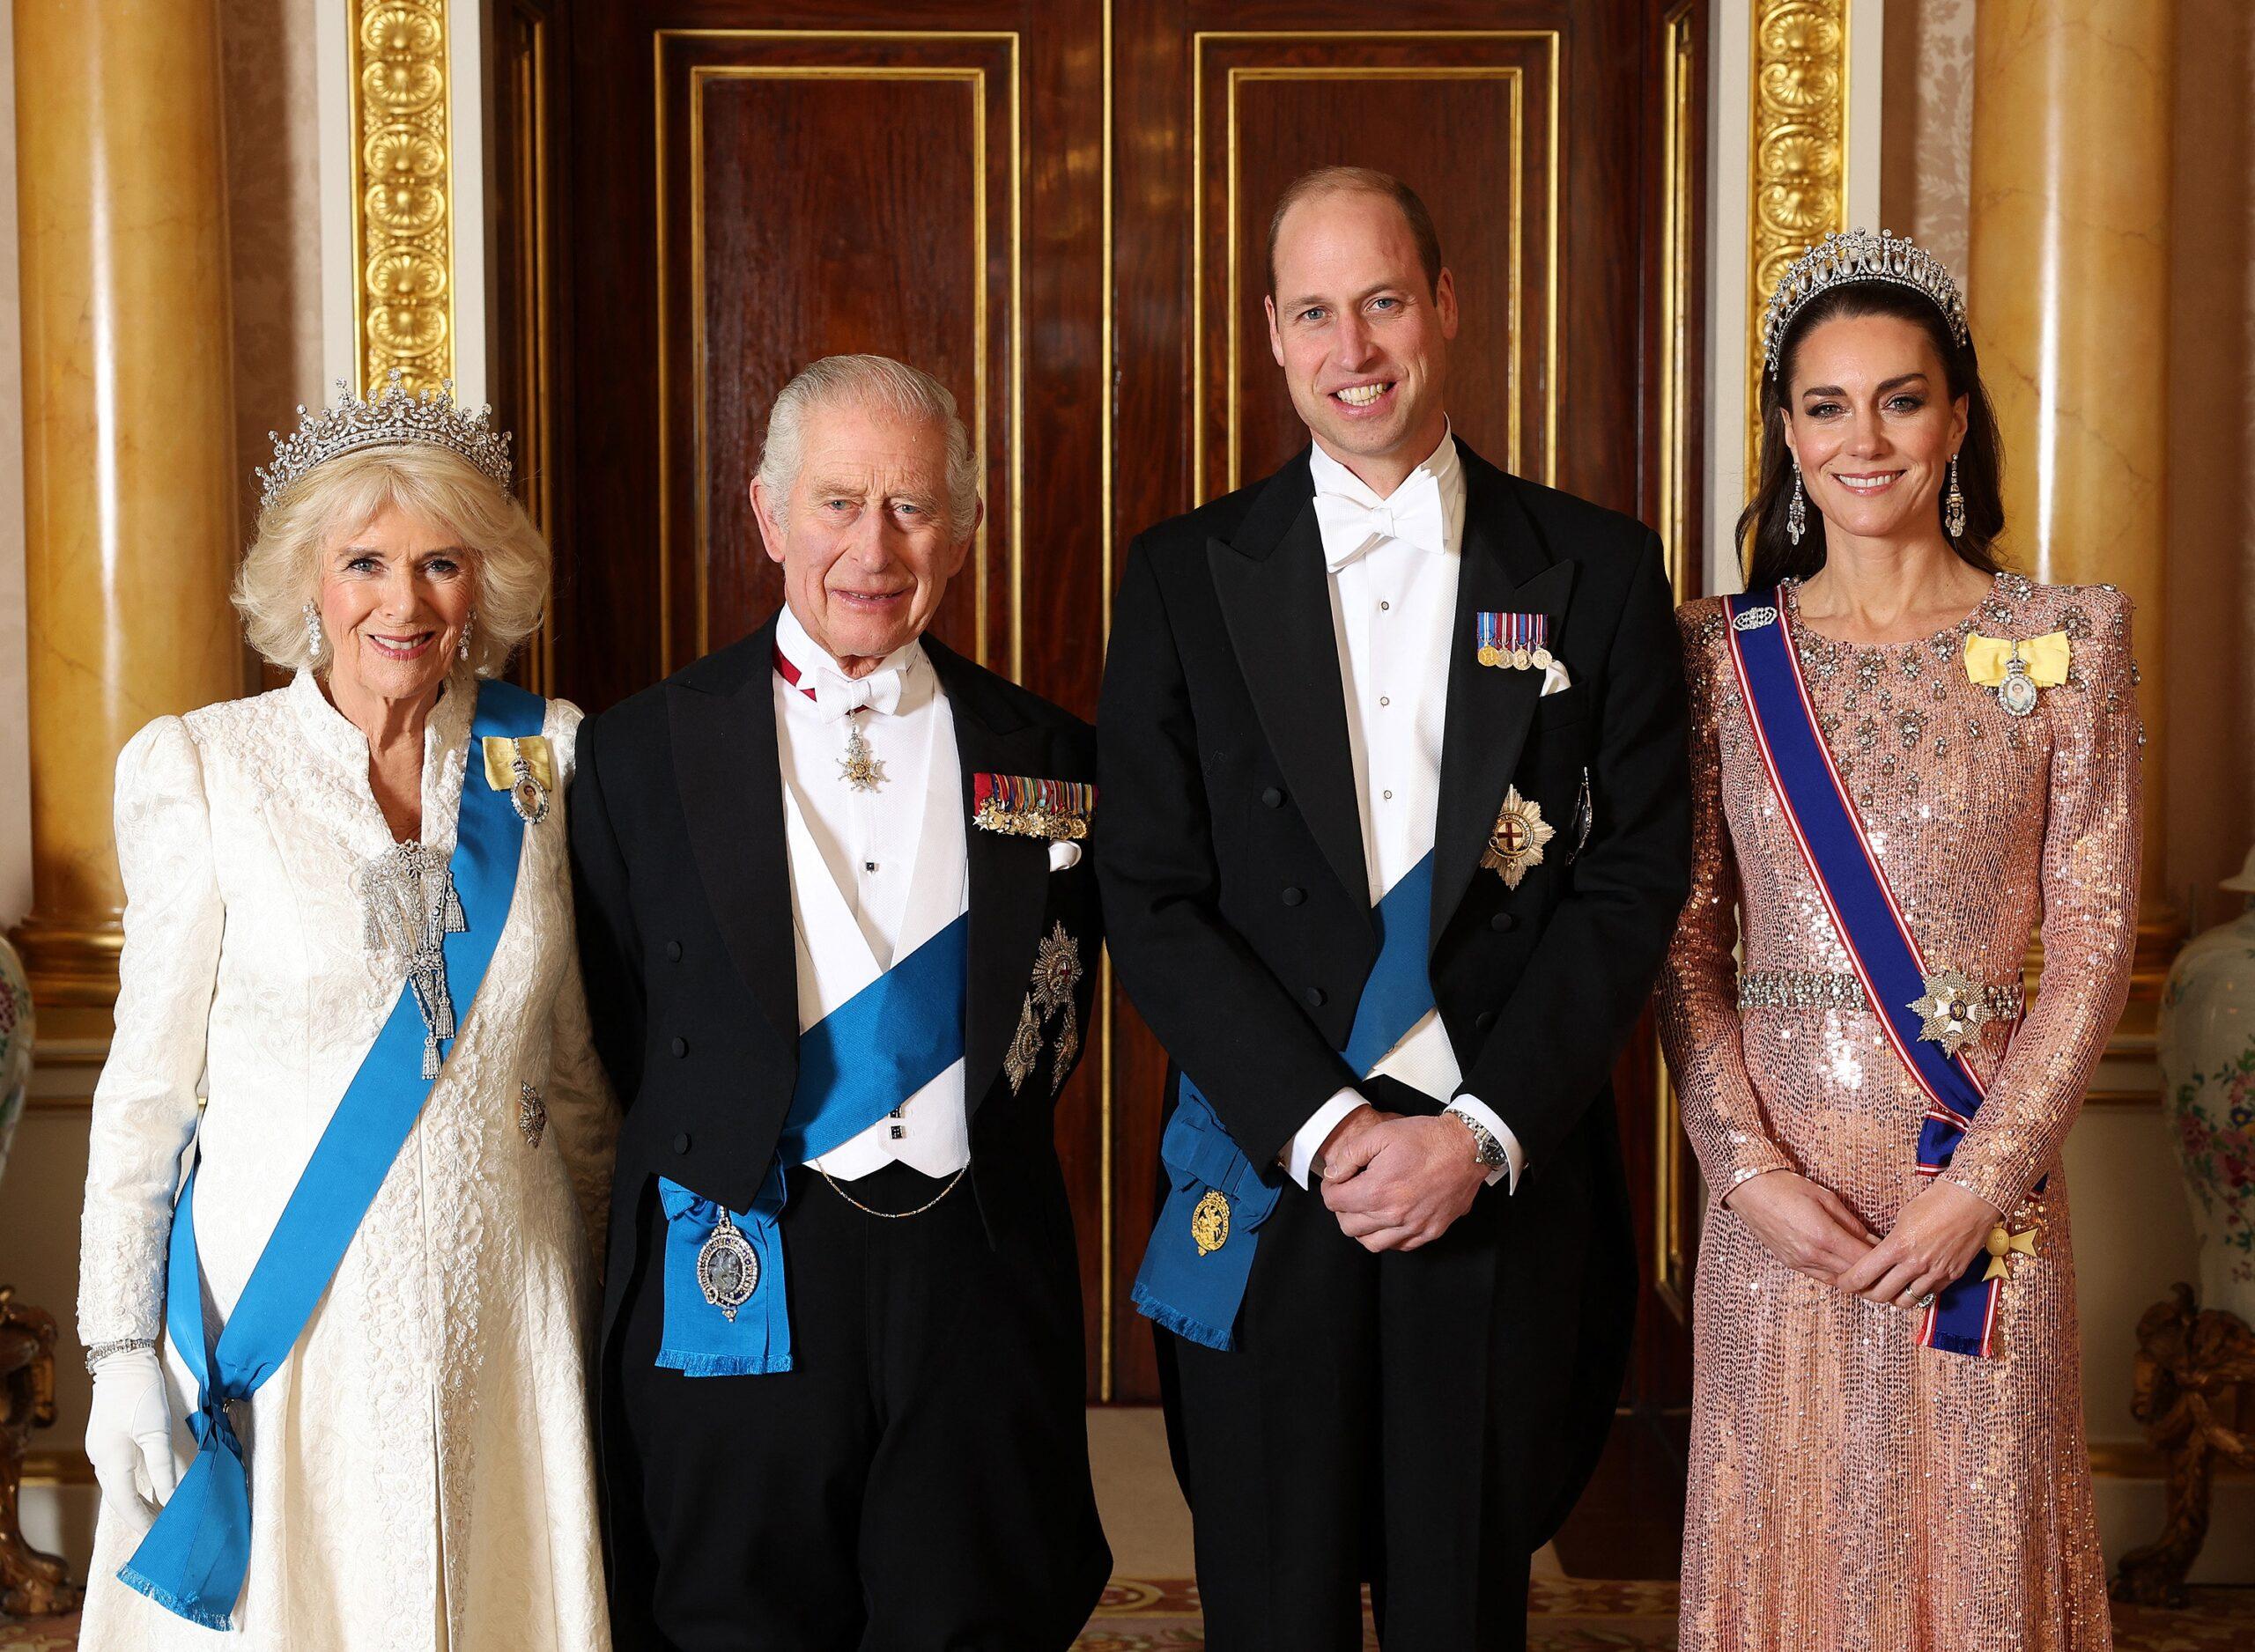 The Royal Family attend the Diplomatic Reception